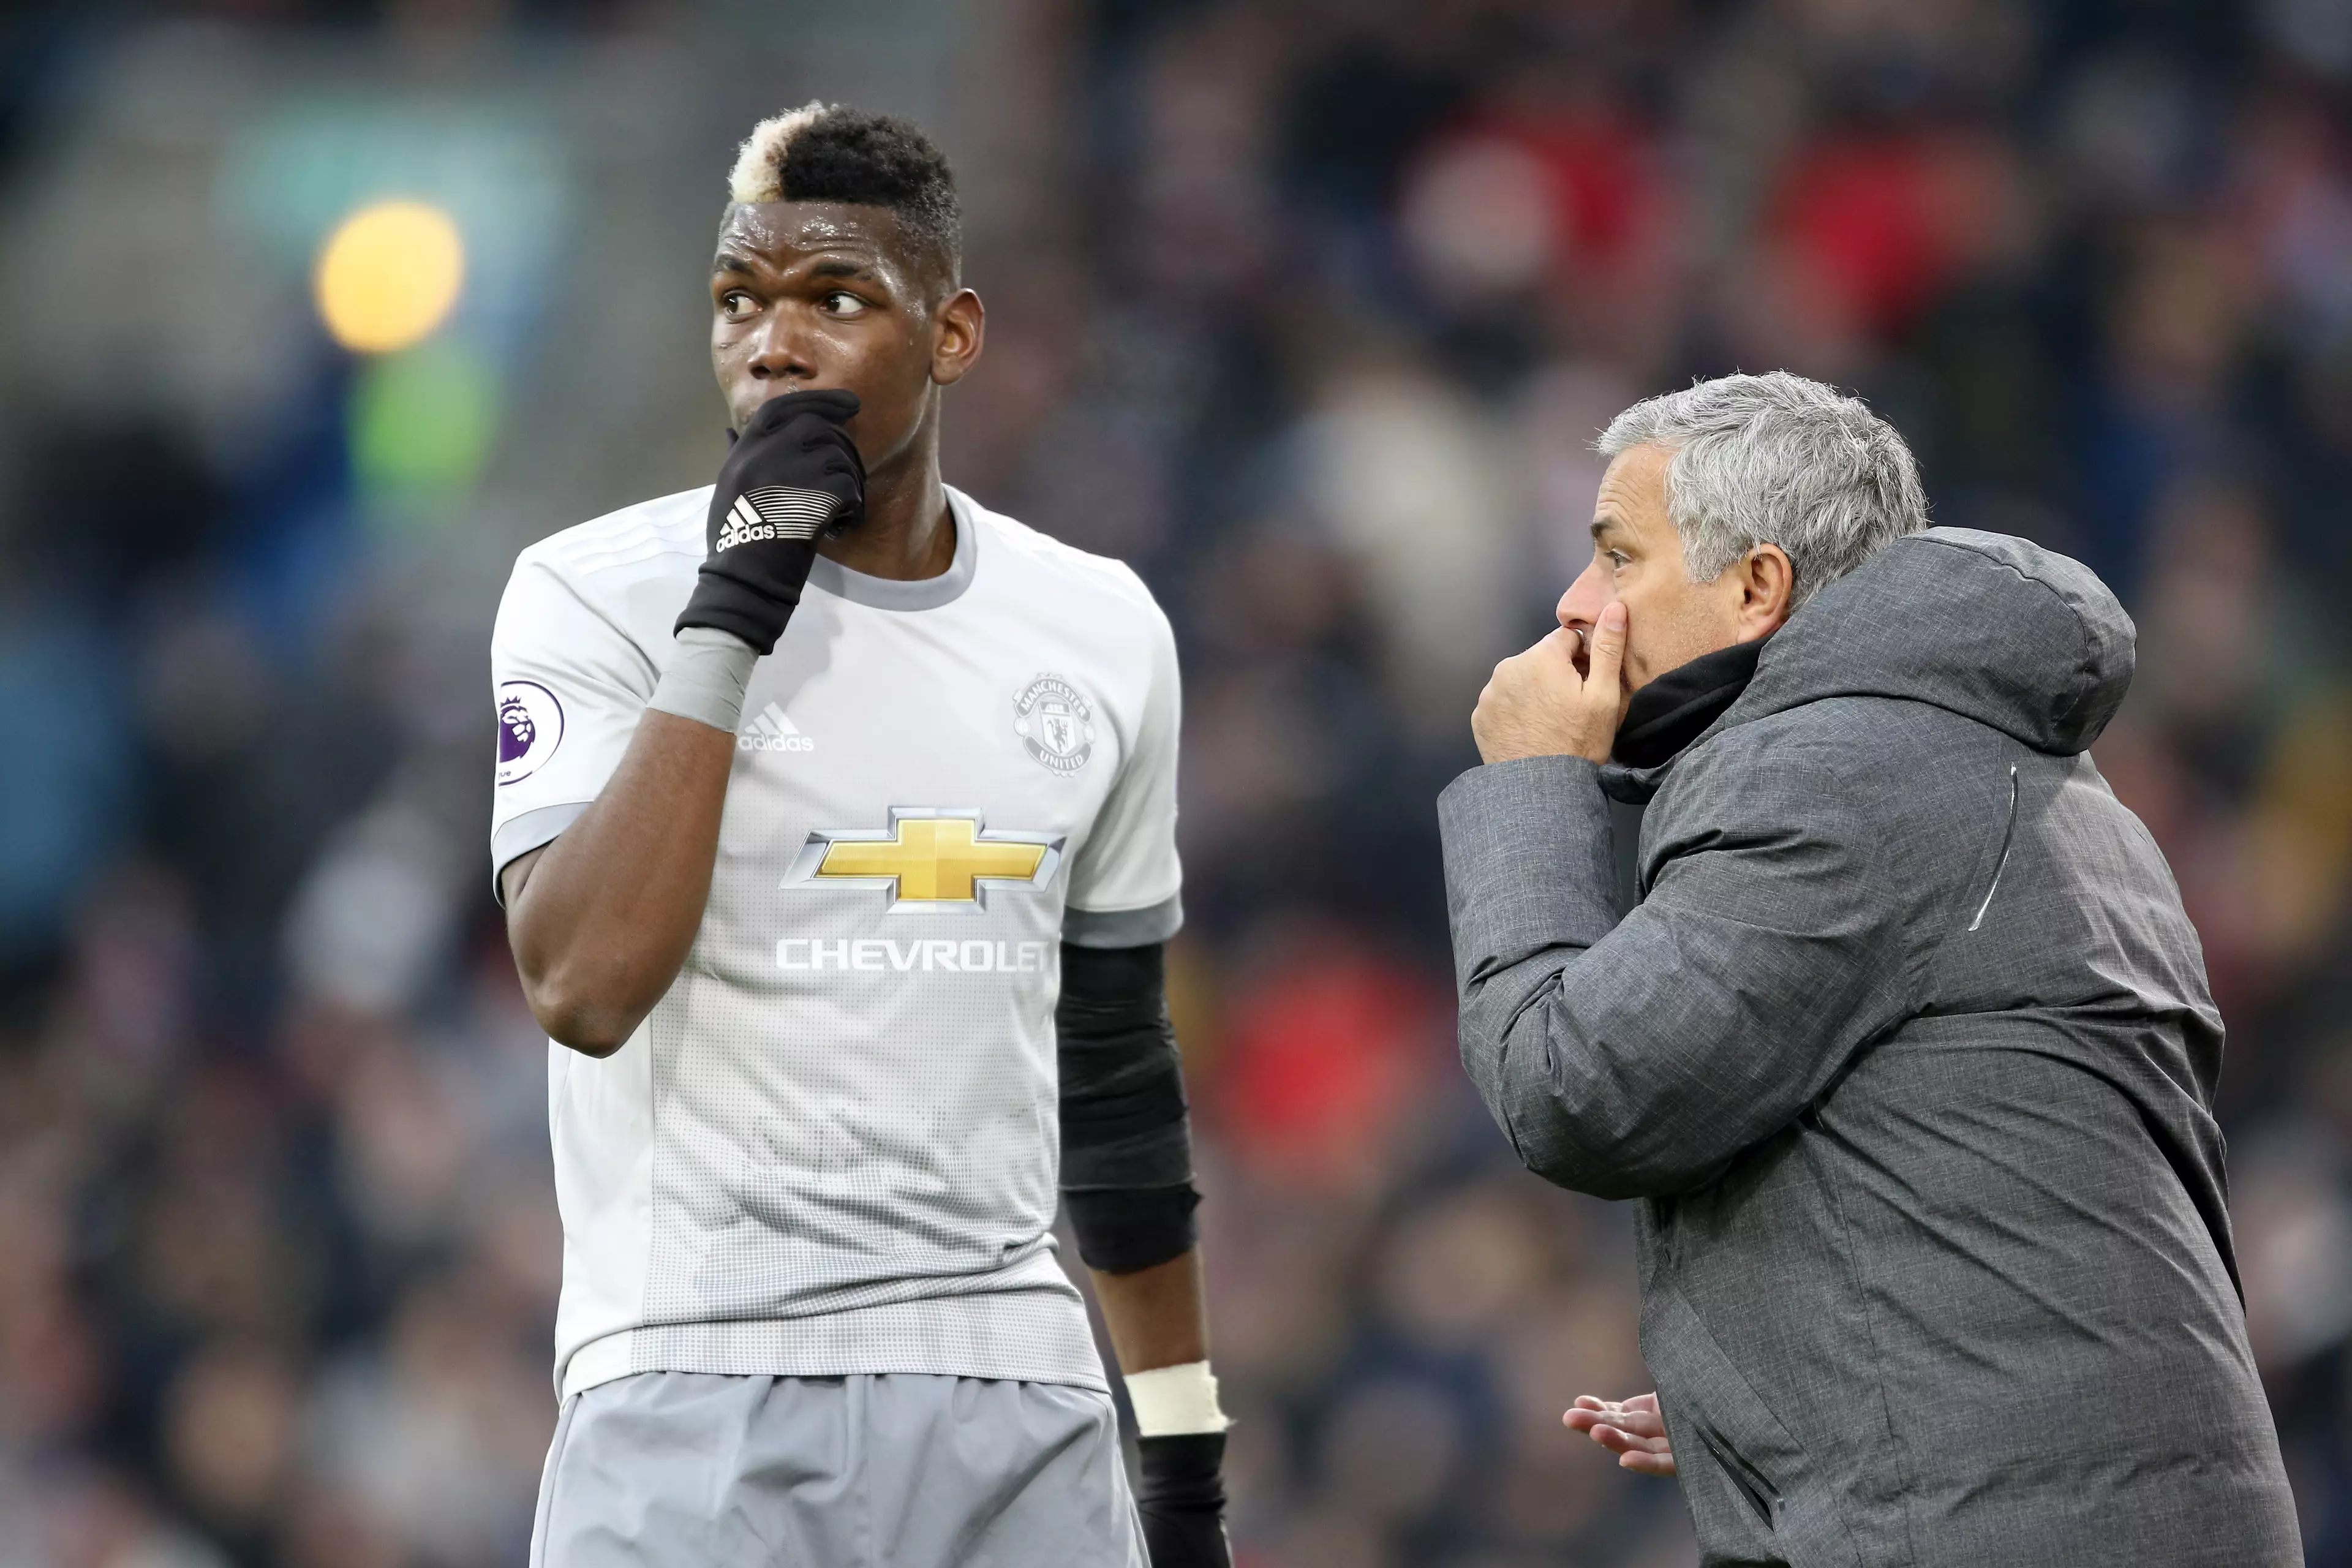 Things between Pogba and Mourinho haven't always been great. Image: PA Images